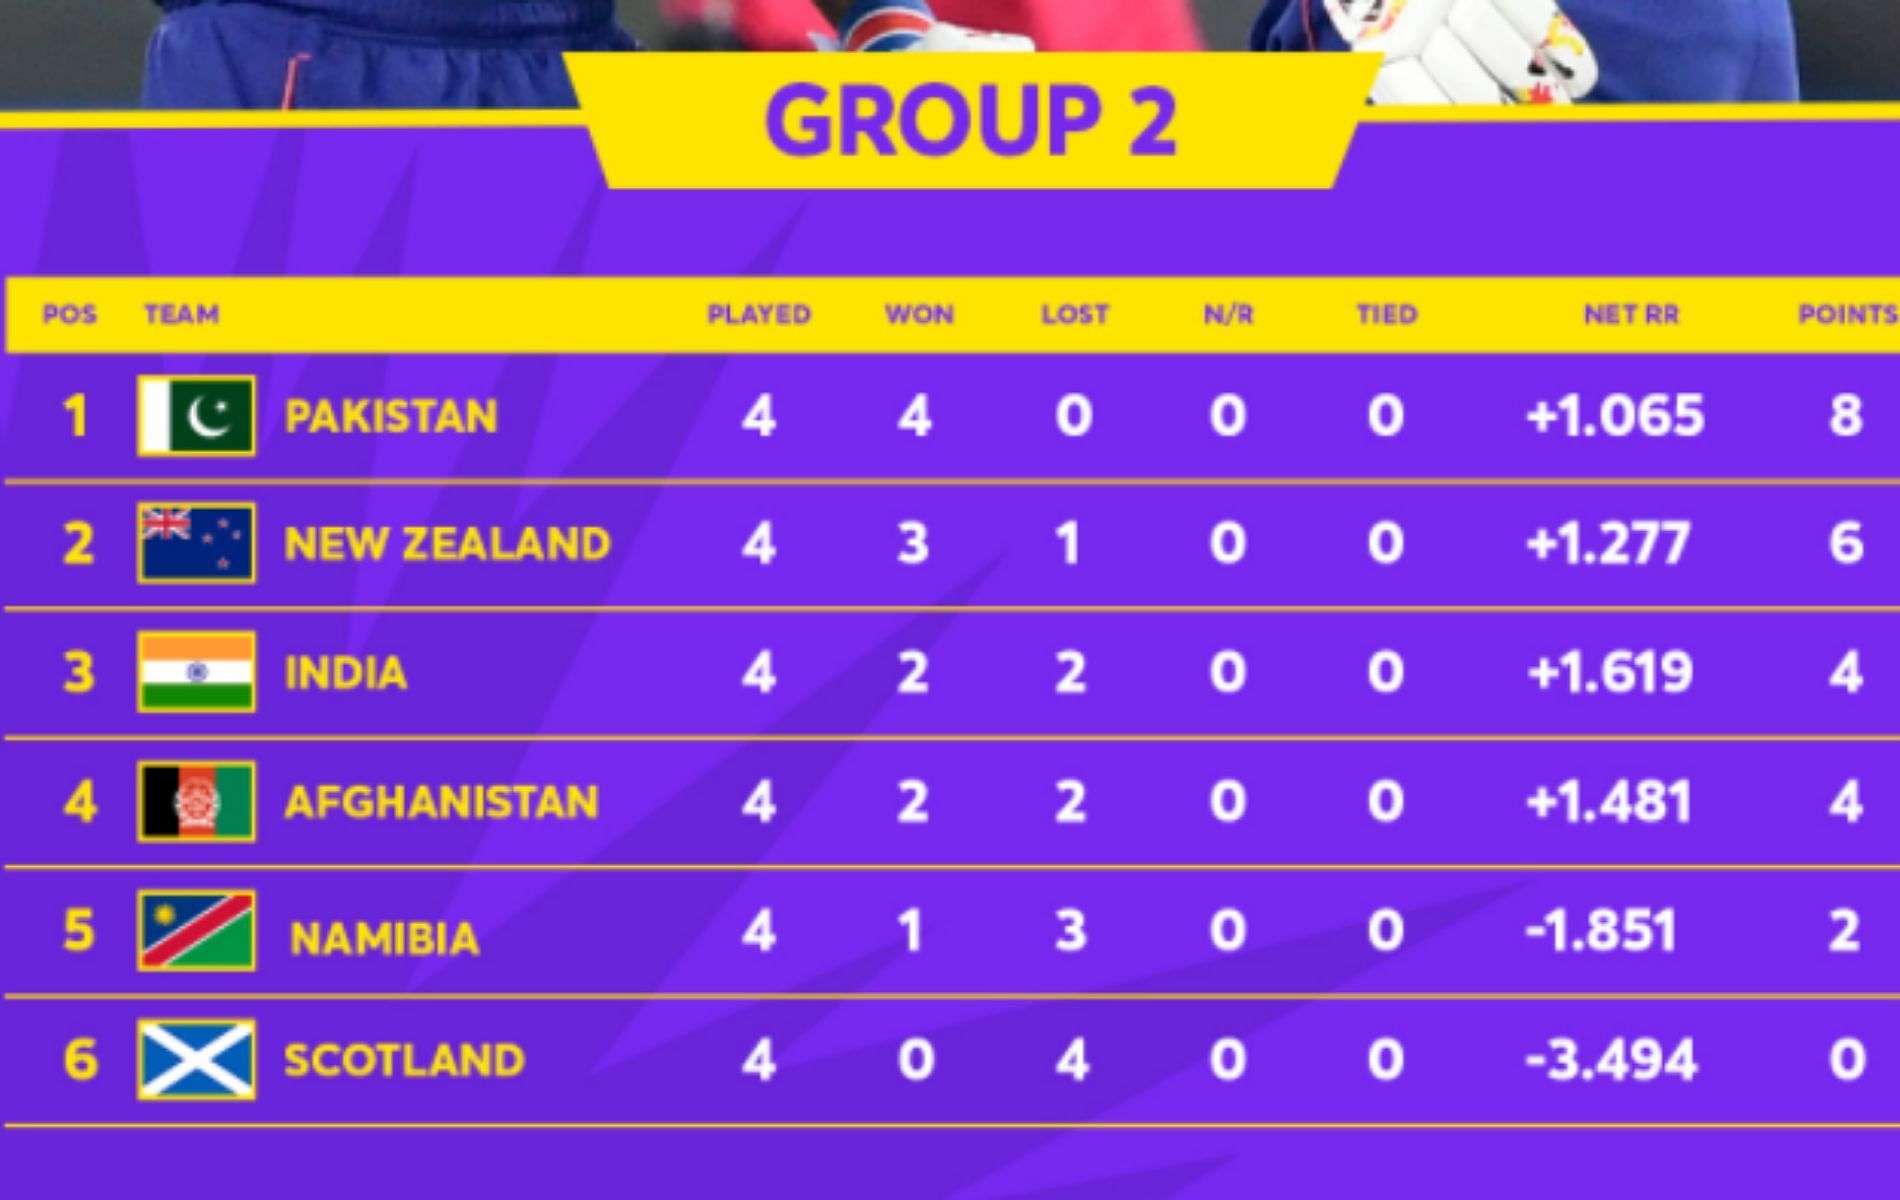 World cup points table 2021